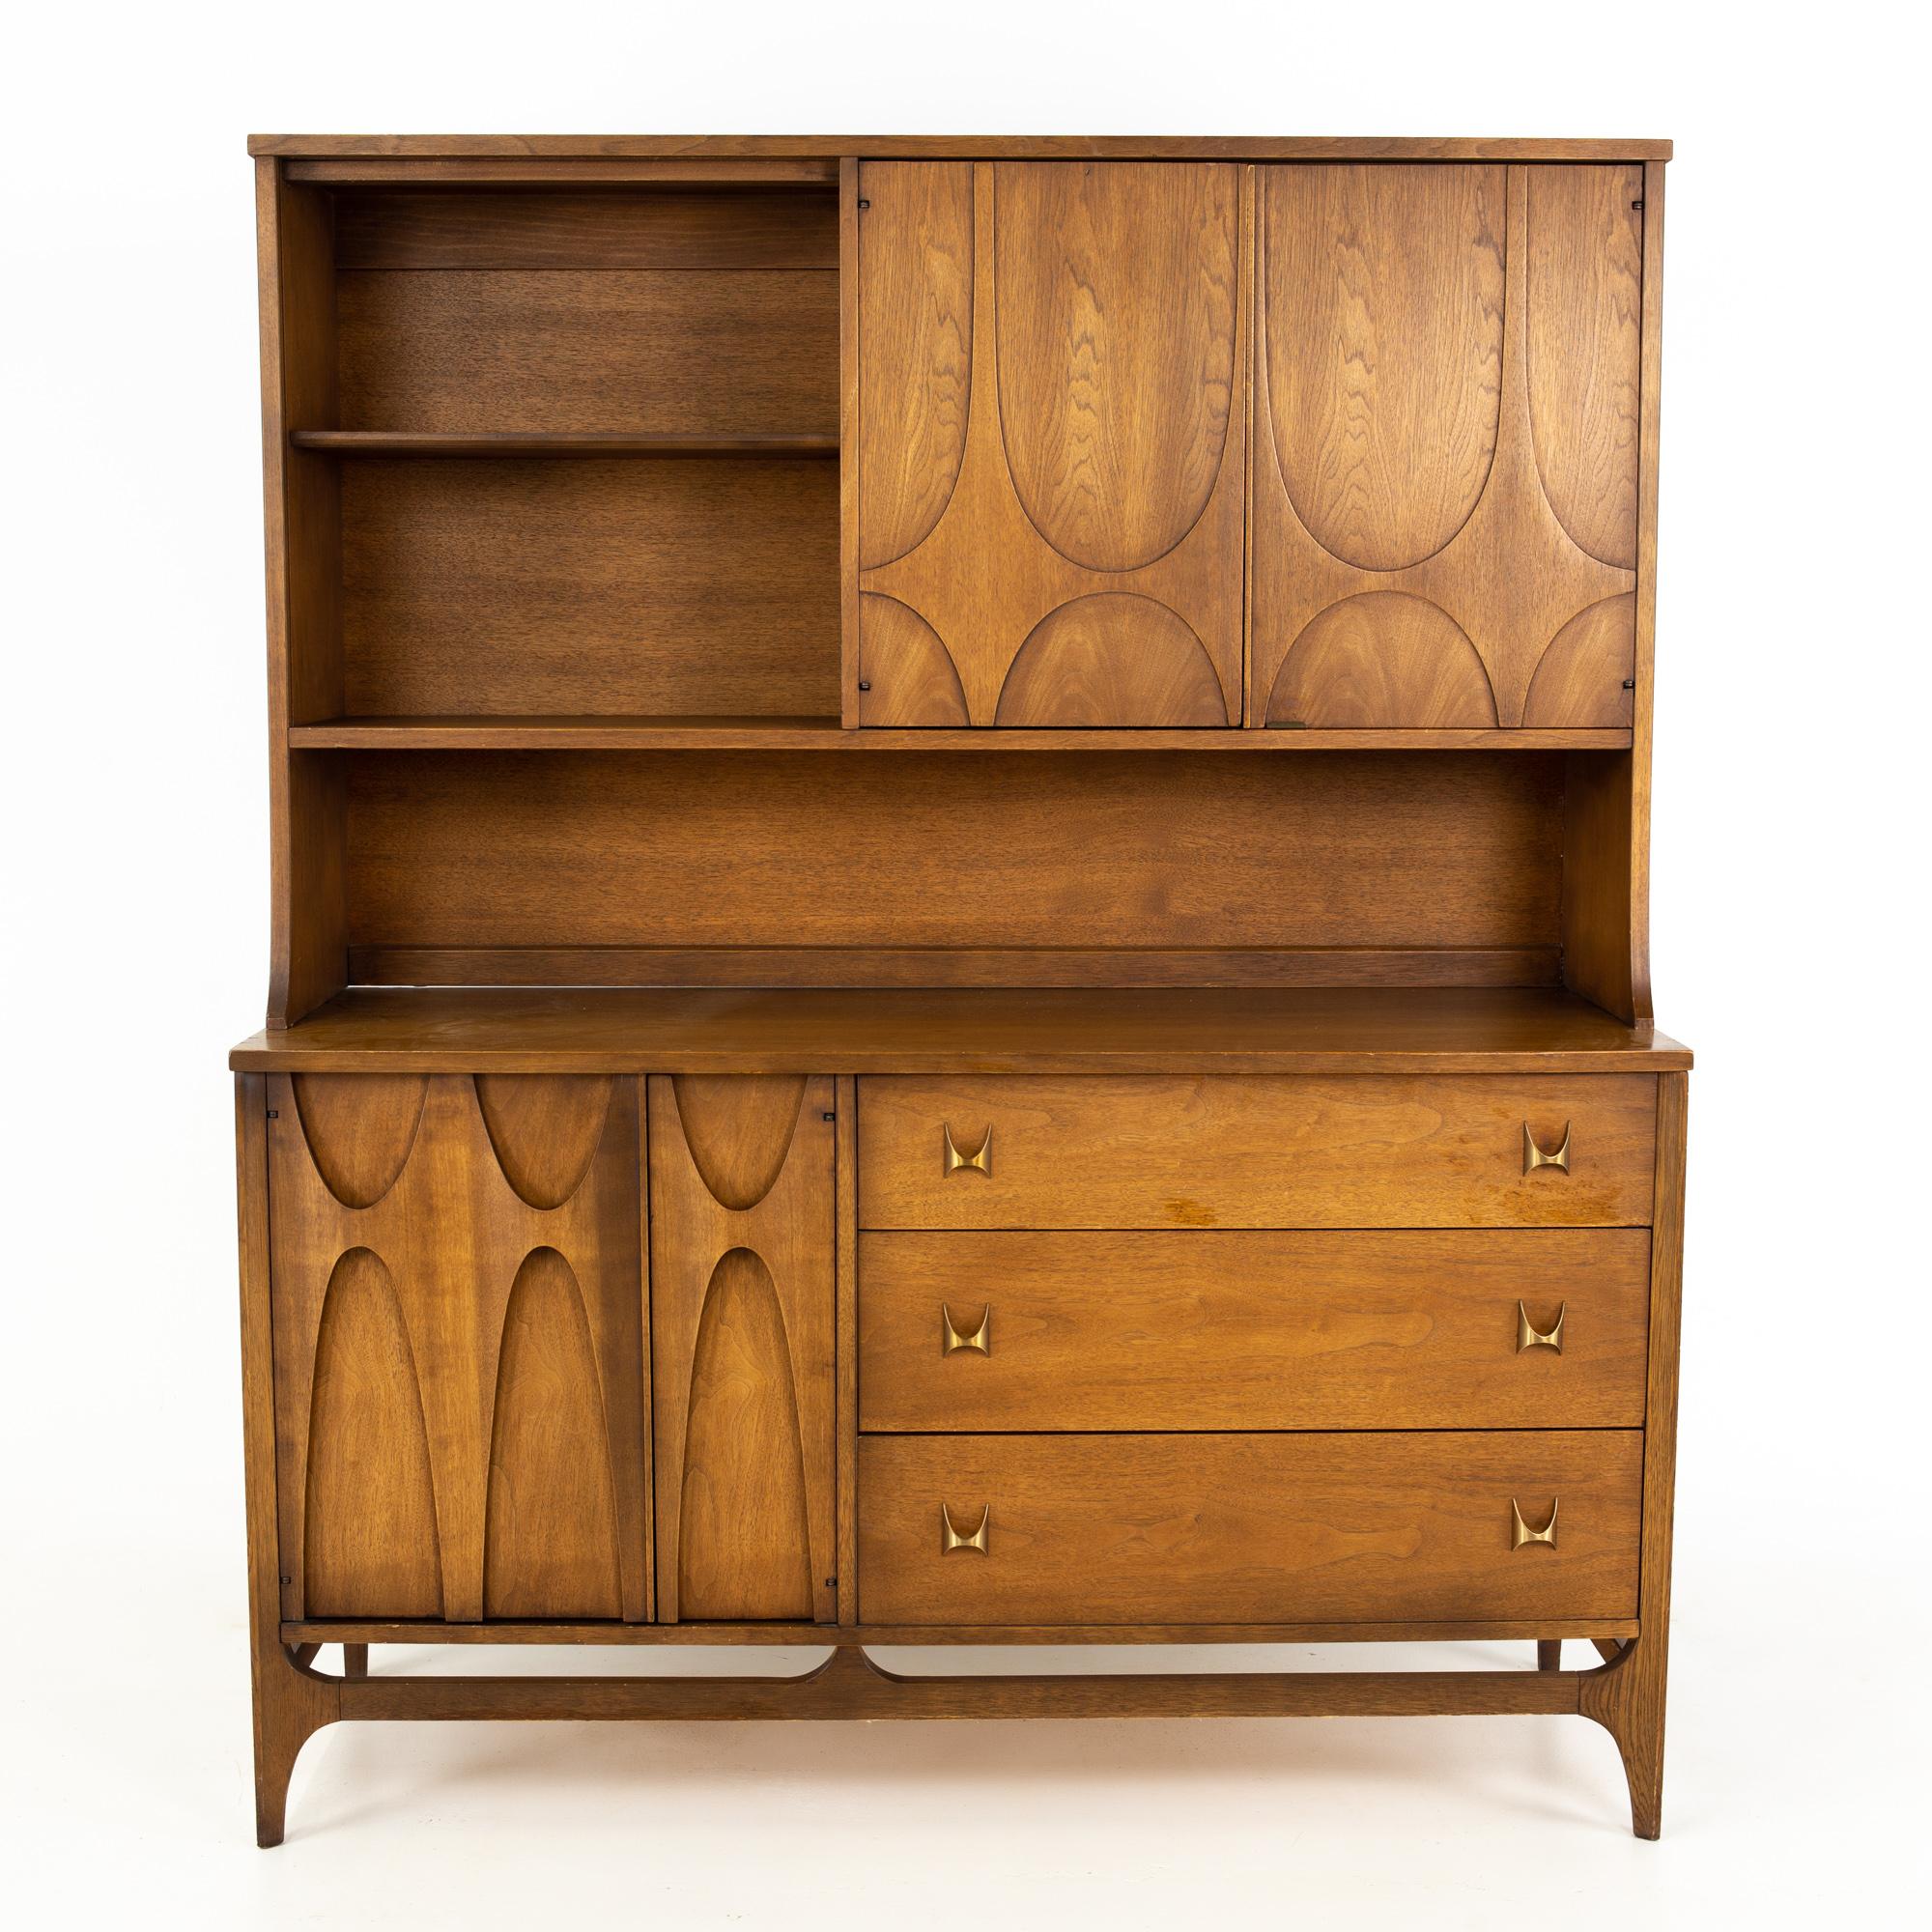 Broyhill Brasilia Brutalist midcentury walnut sideboard credenza buffet and hutch
Buffet and hutch measures: 54 wide x 19 deep x 65 inches high

All pieces of furniture can be had in what we call restored vintage condition. That means the piece